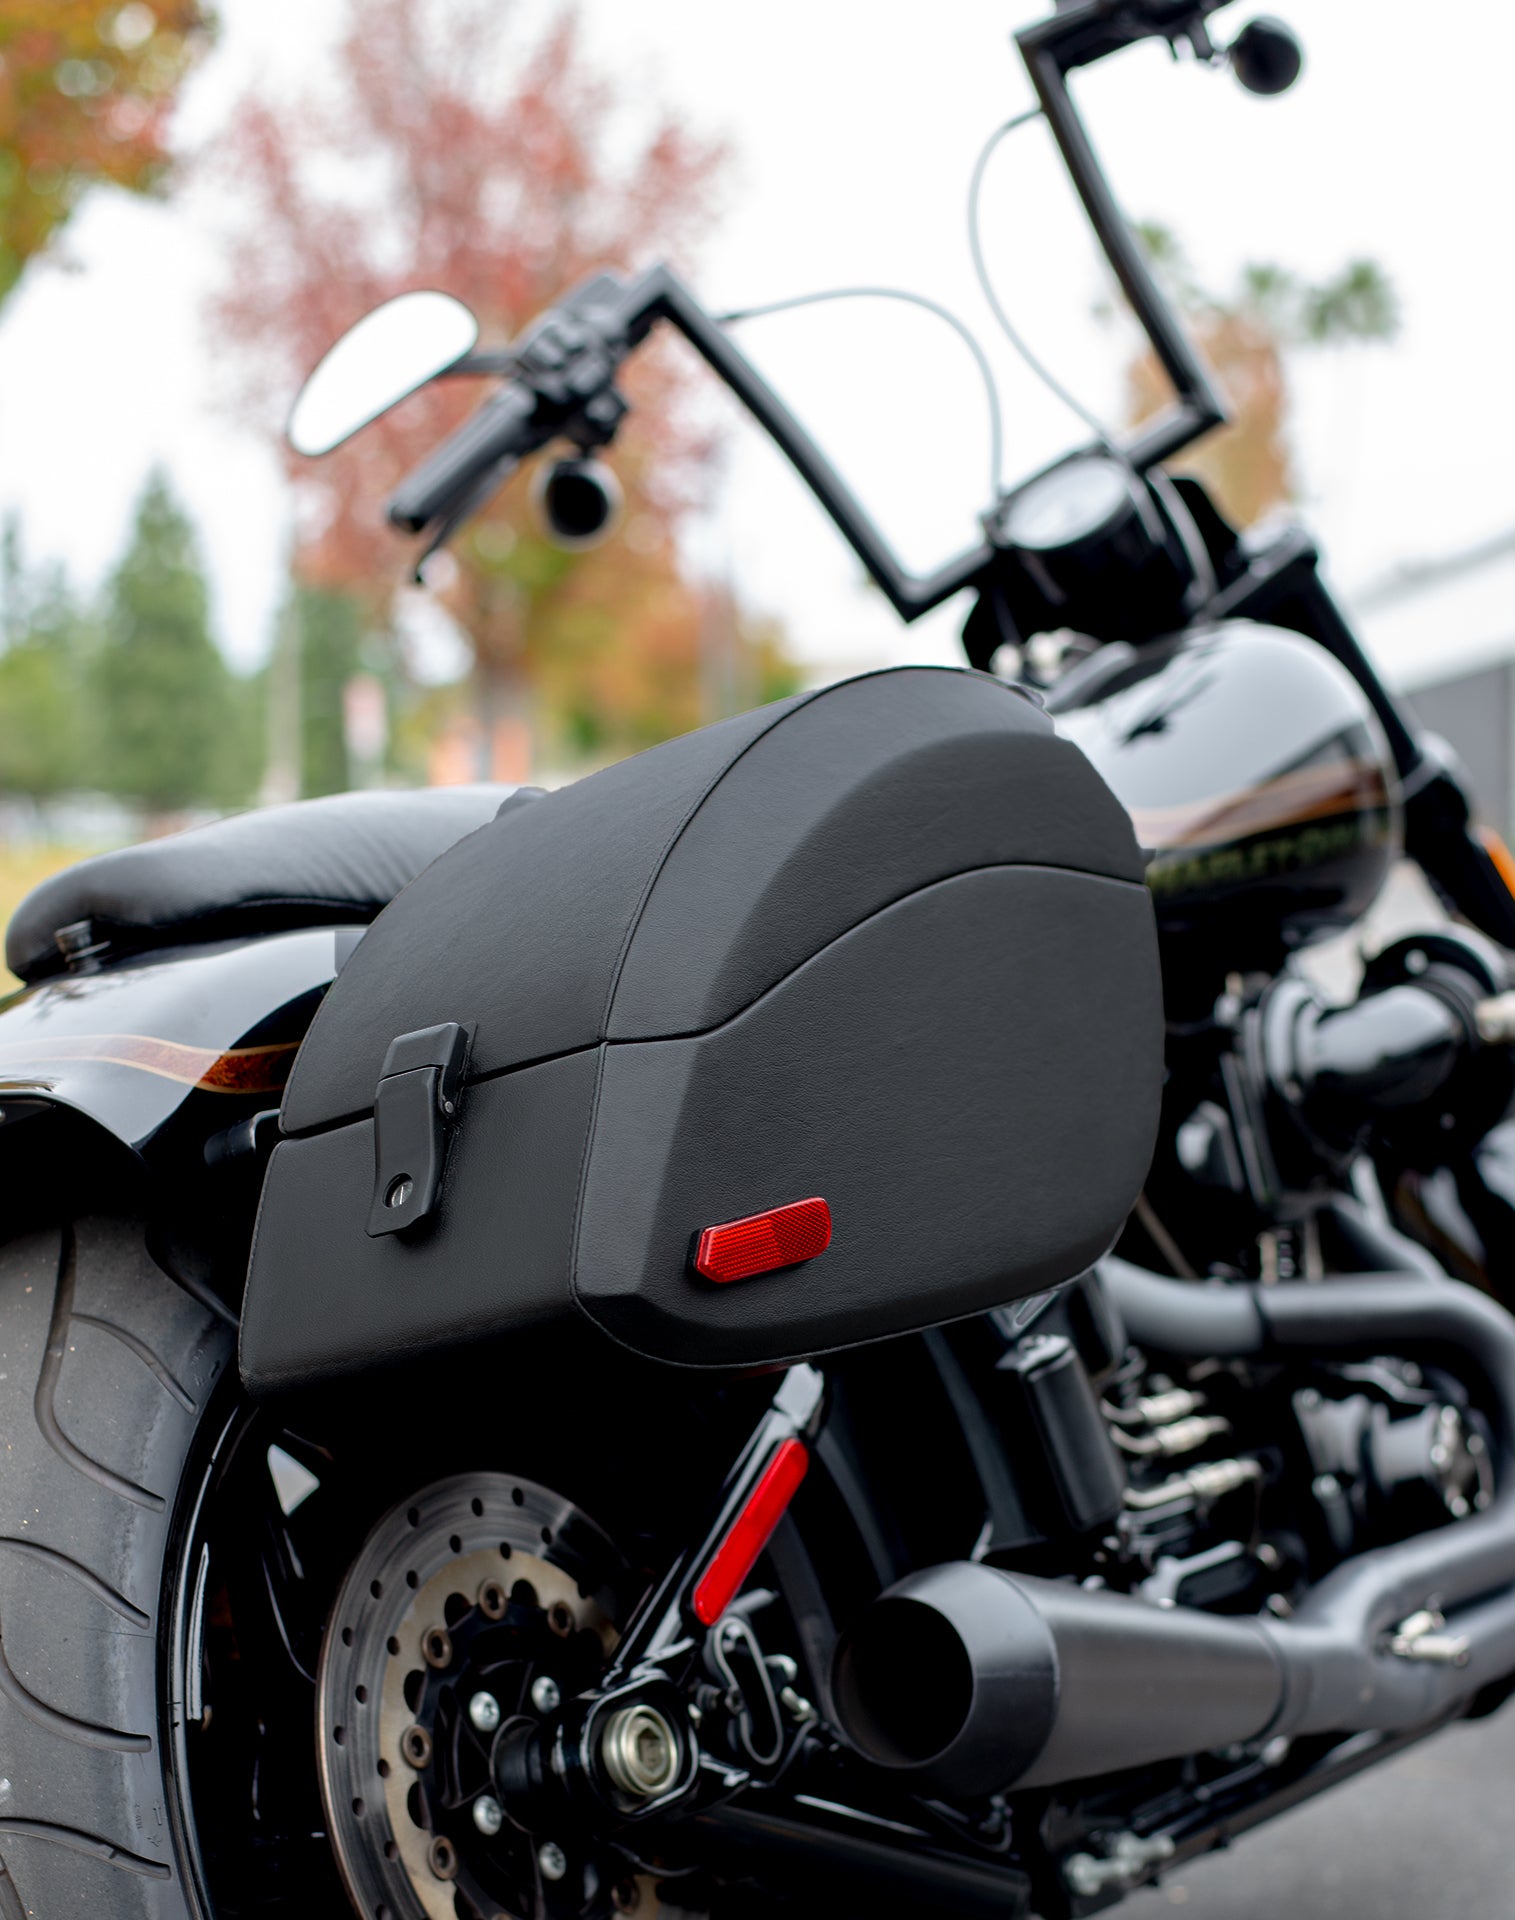 Viking Phantom Large Leather Wrapped Motorcycle Hard Saddlebags For Harley Softail Low Rider S Fxlrs are Durable